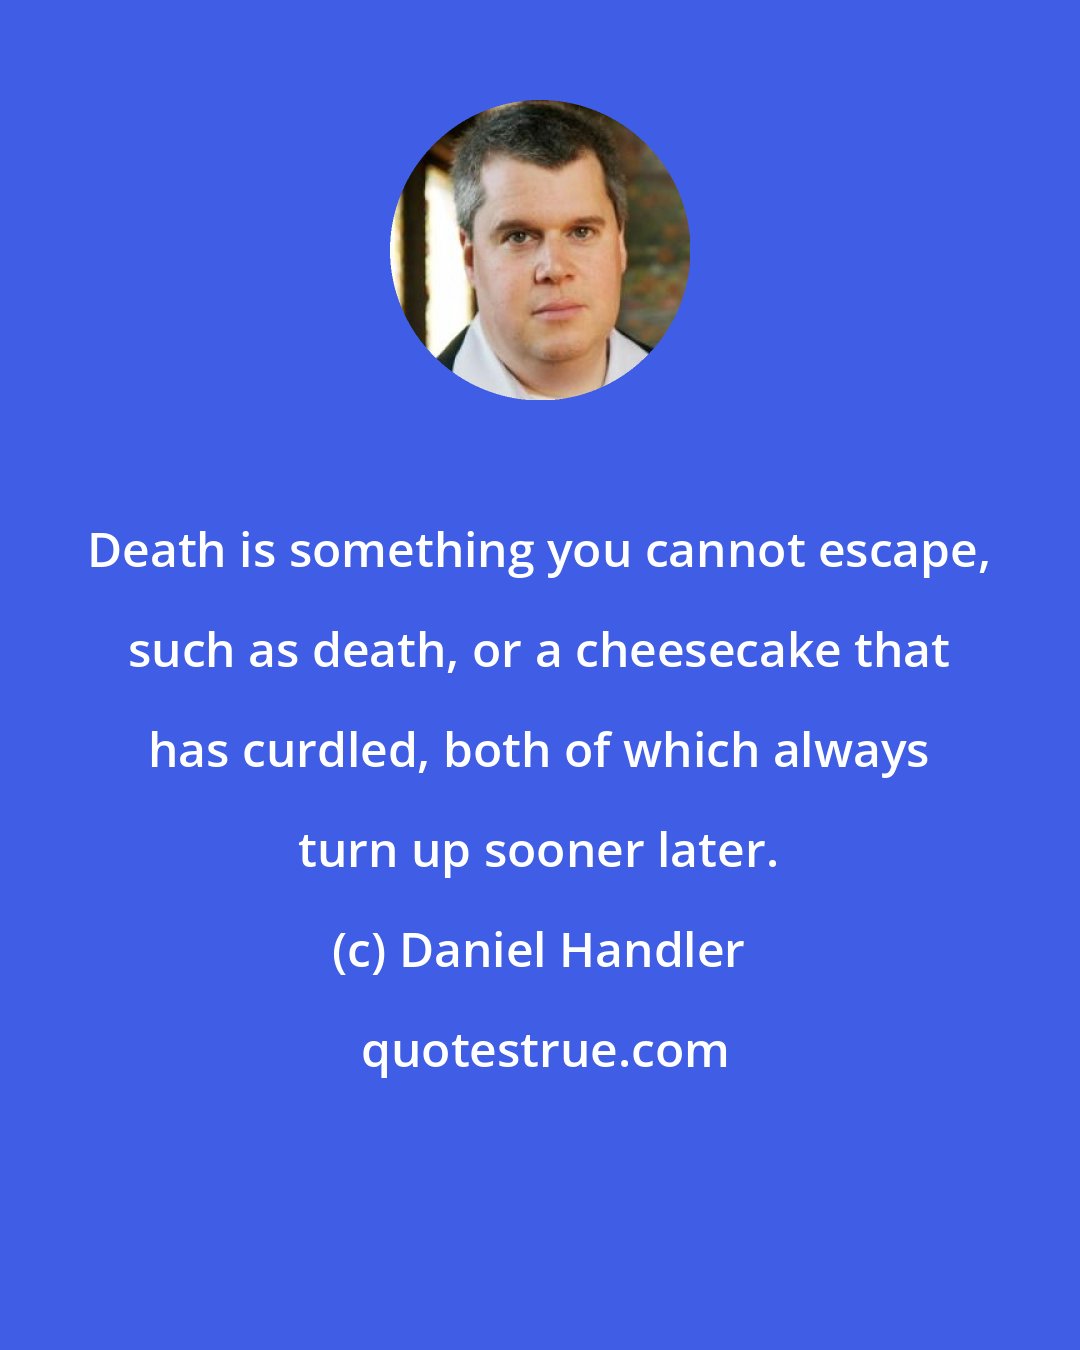 Daniel Handler: Death is something you cannot escape, such as death, or a cheesecake that has curdled, both of which always turn up sooner later.